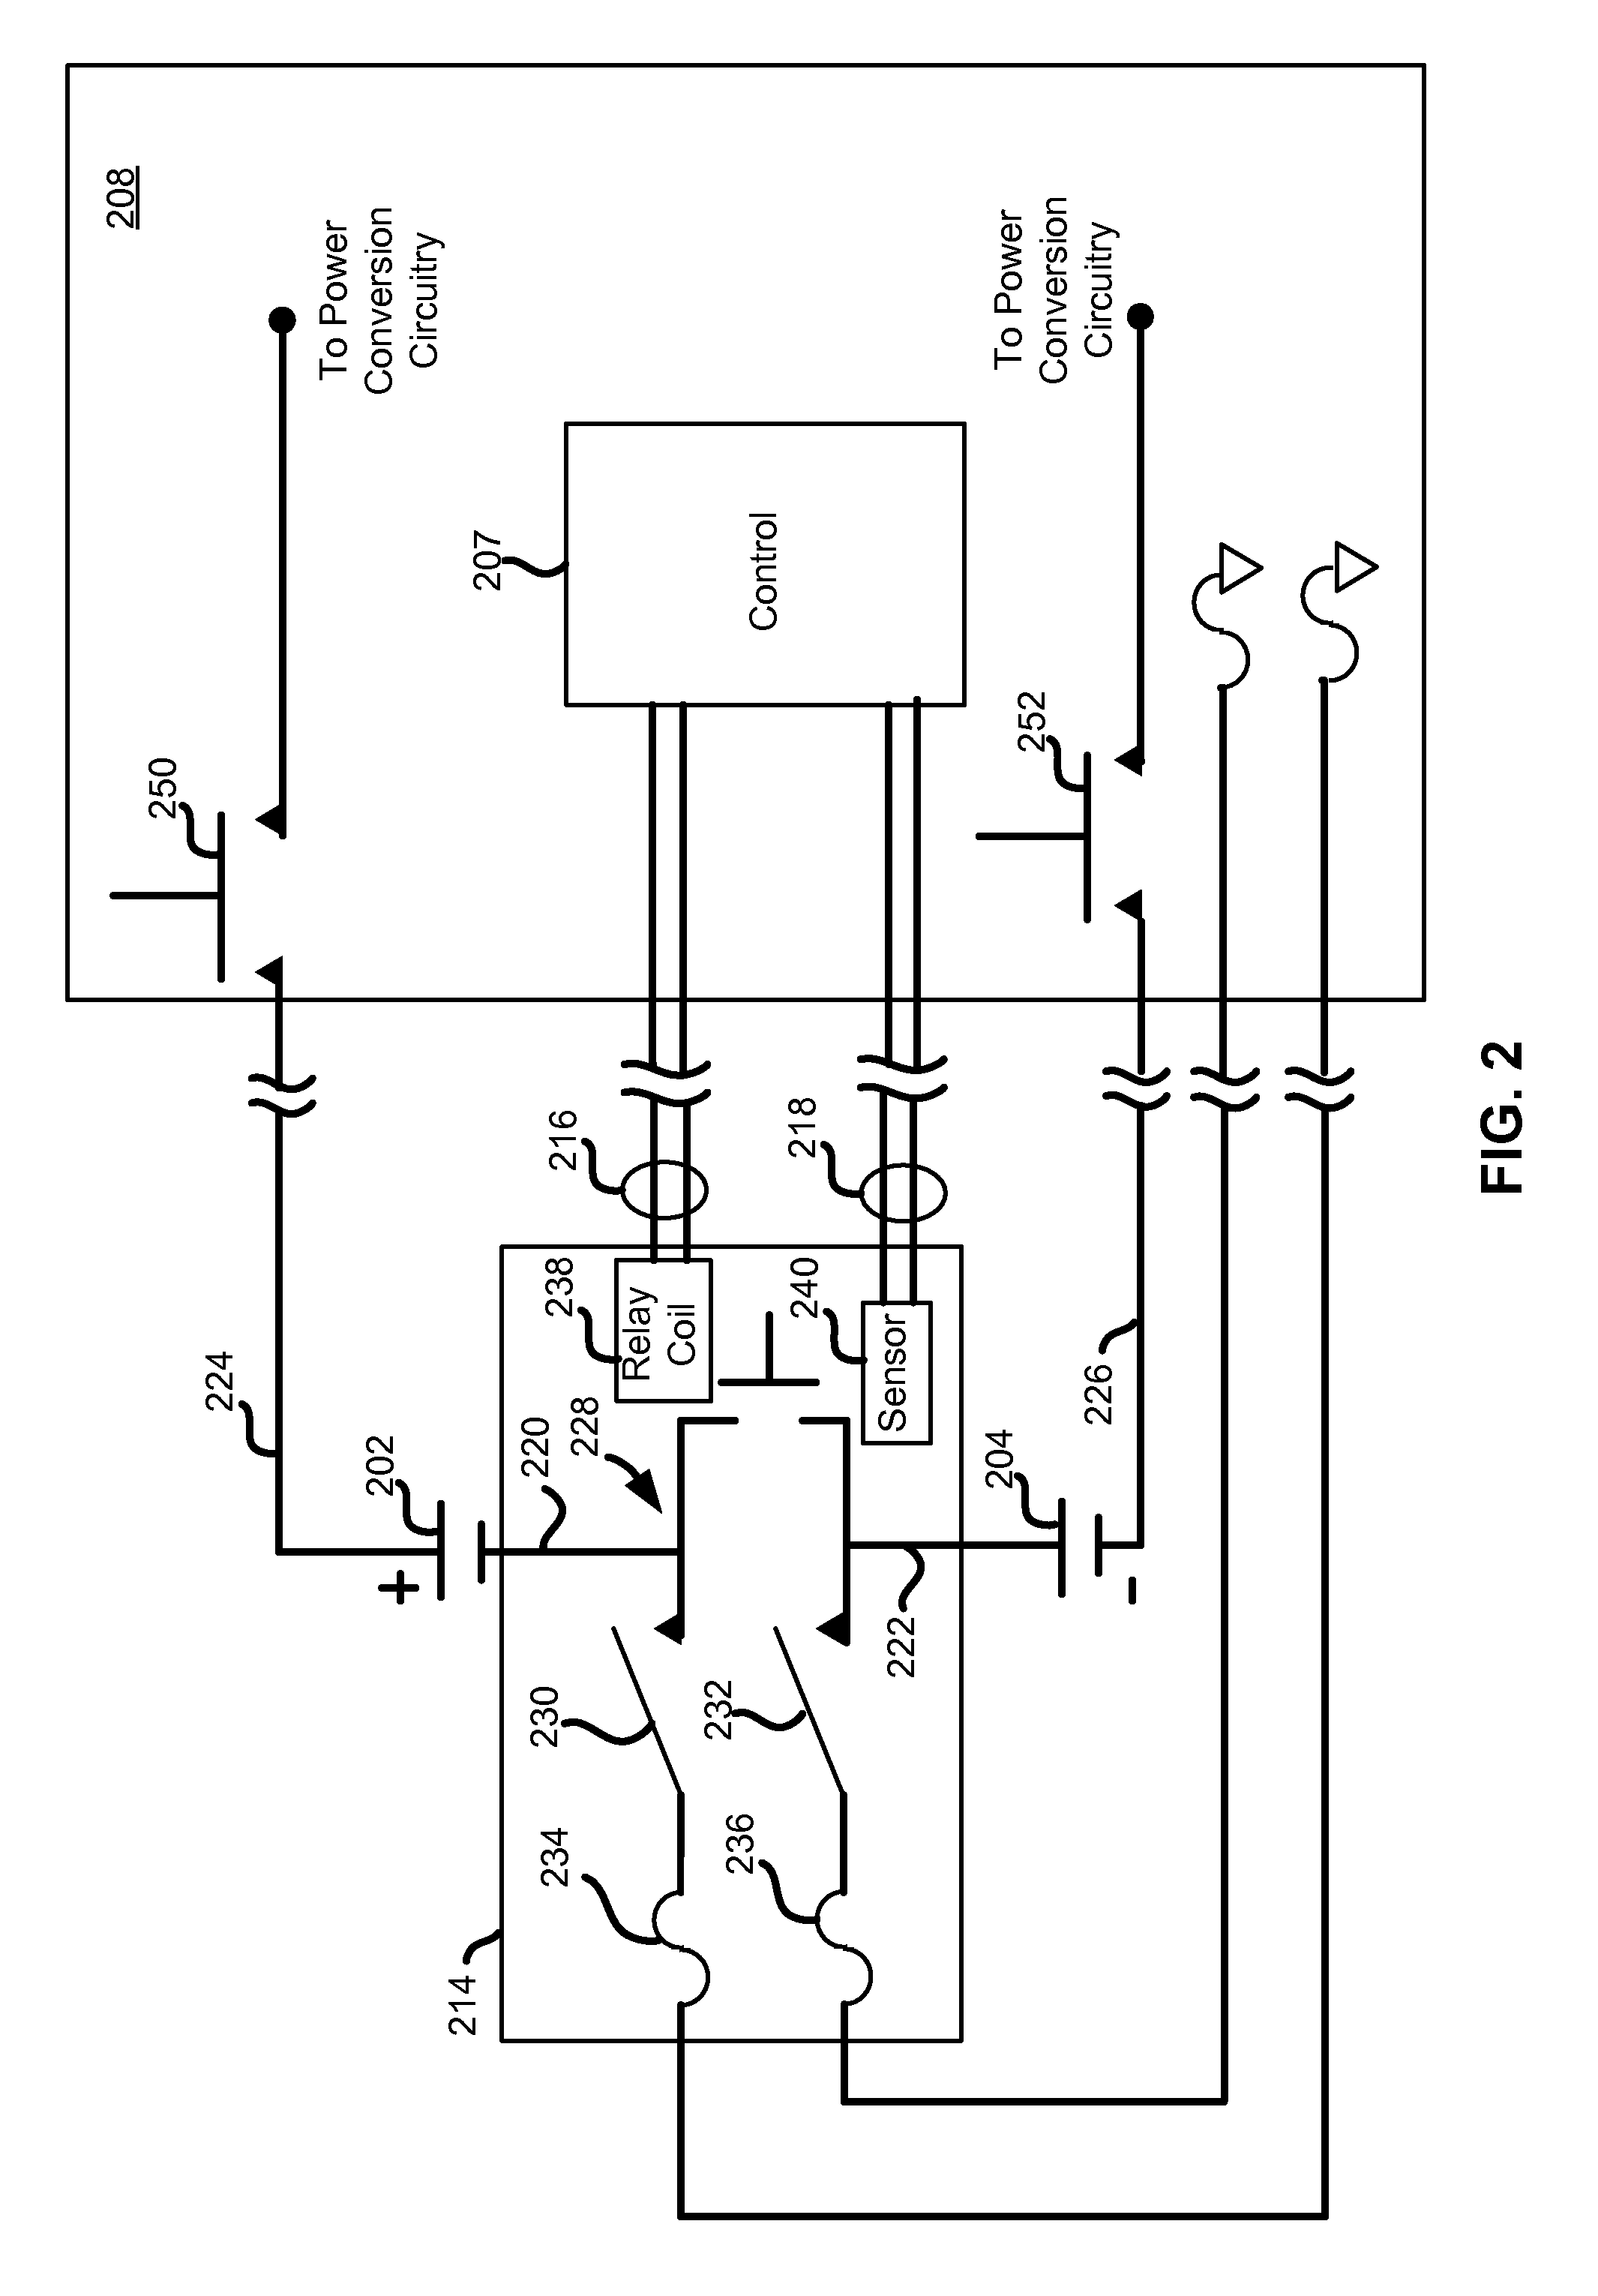 System, method, and apparatus for coupling photovoltaic arrays